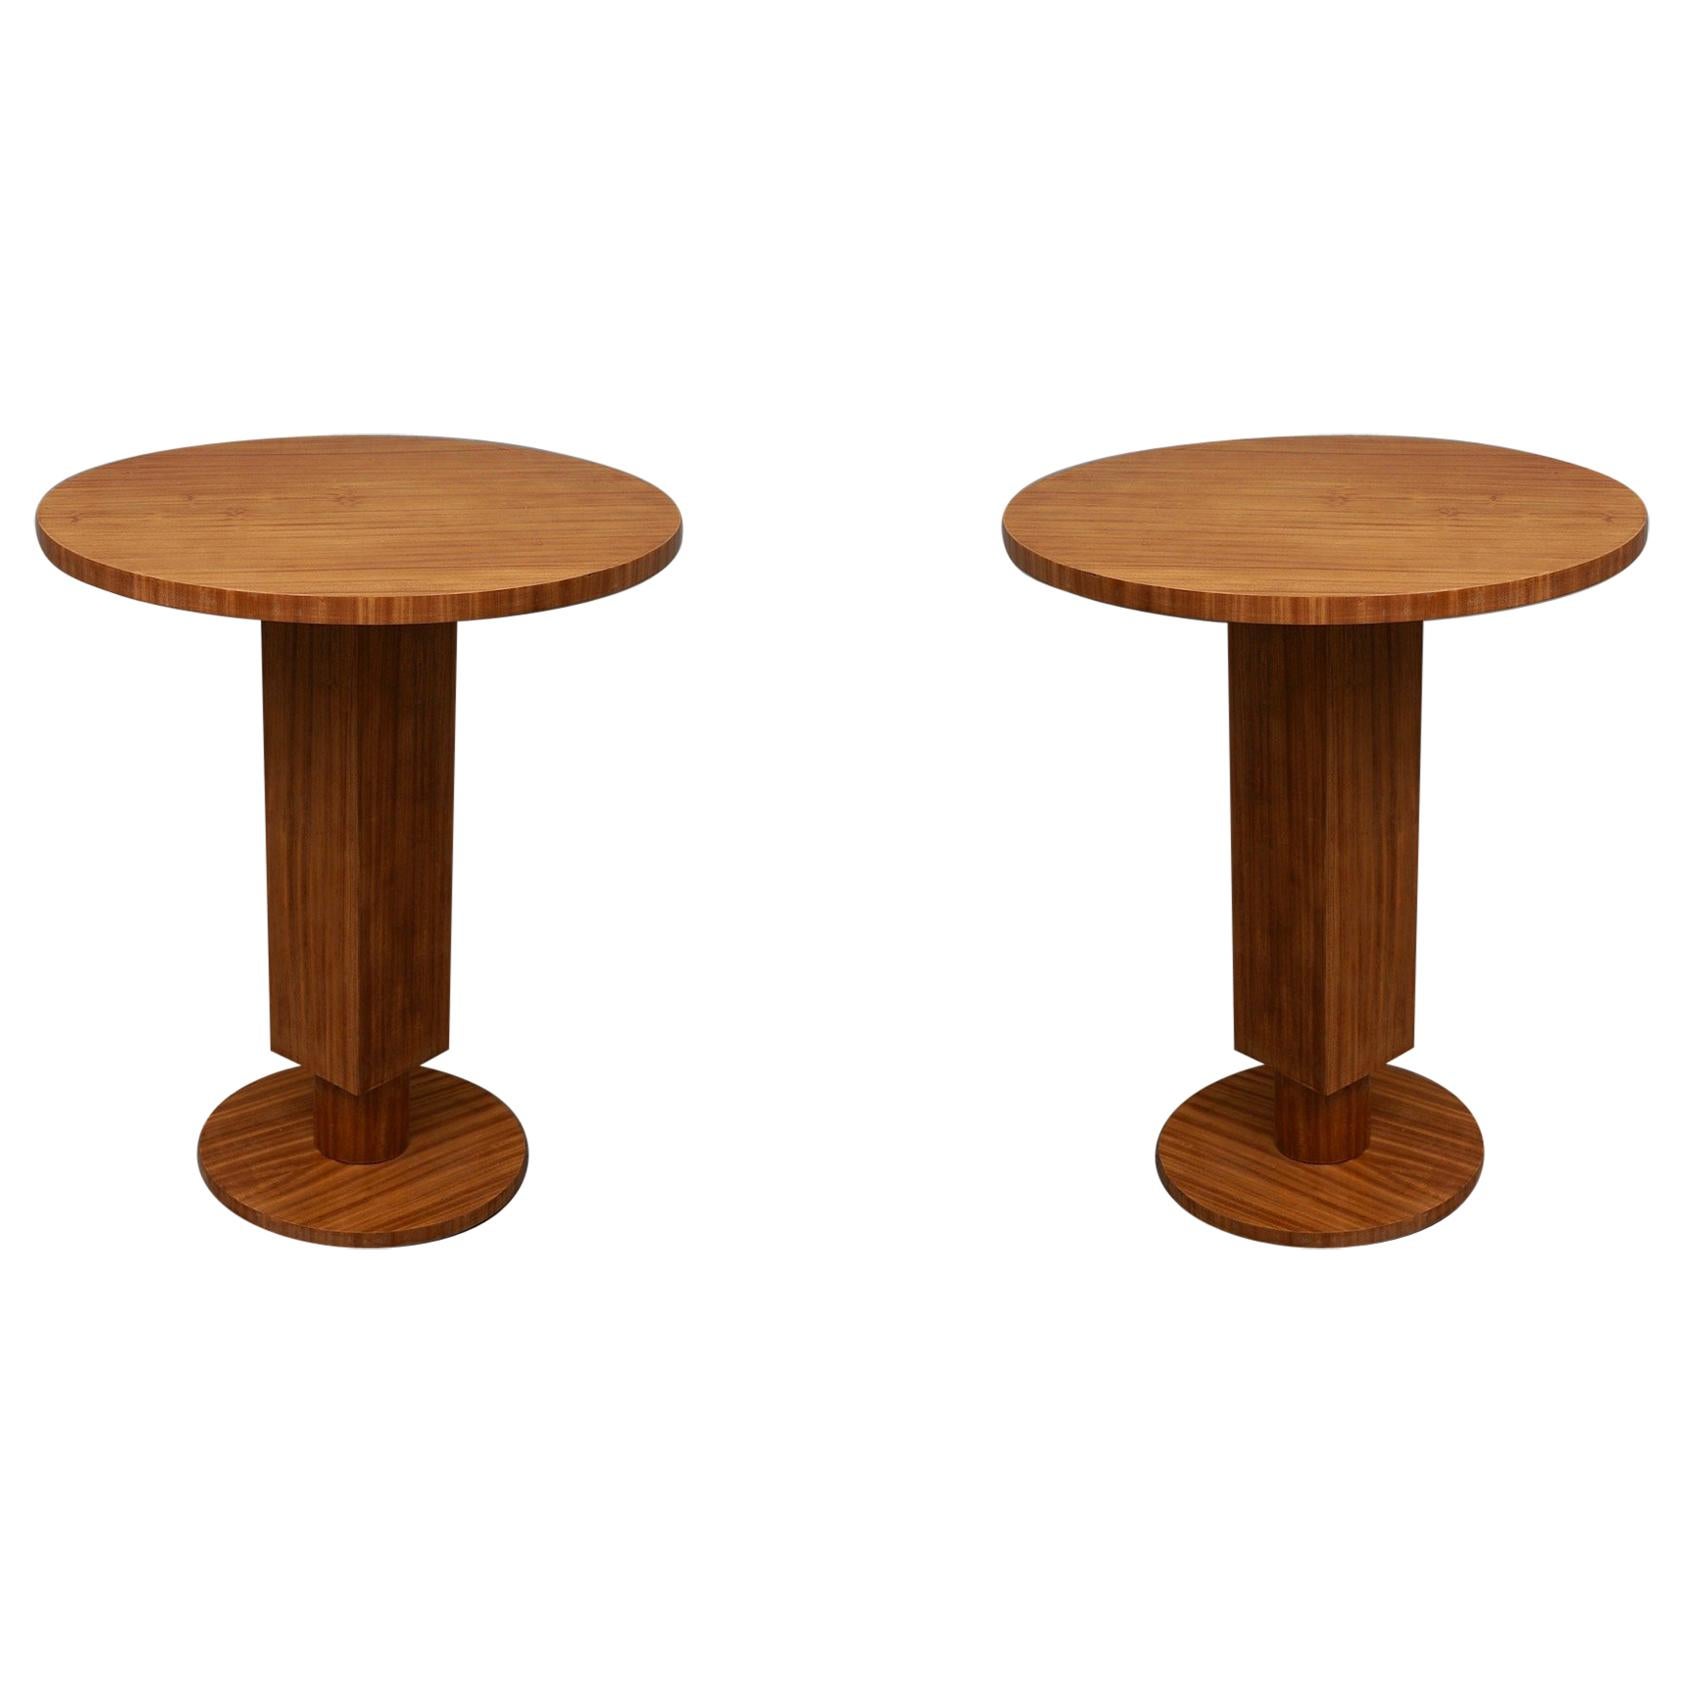 Pair of Art Deco Round Cedar Wood French Side Tables, 1930